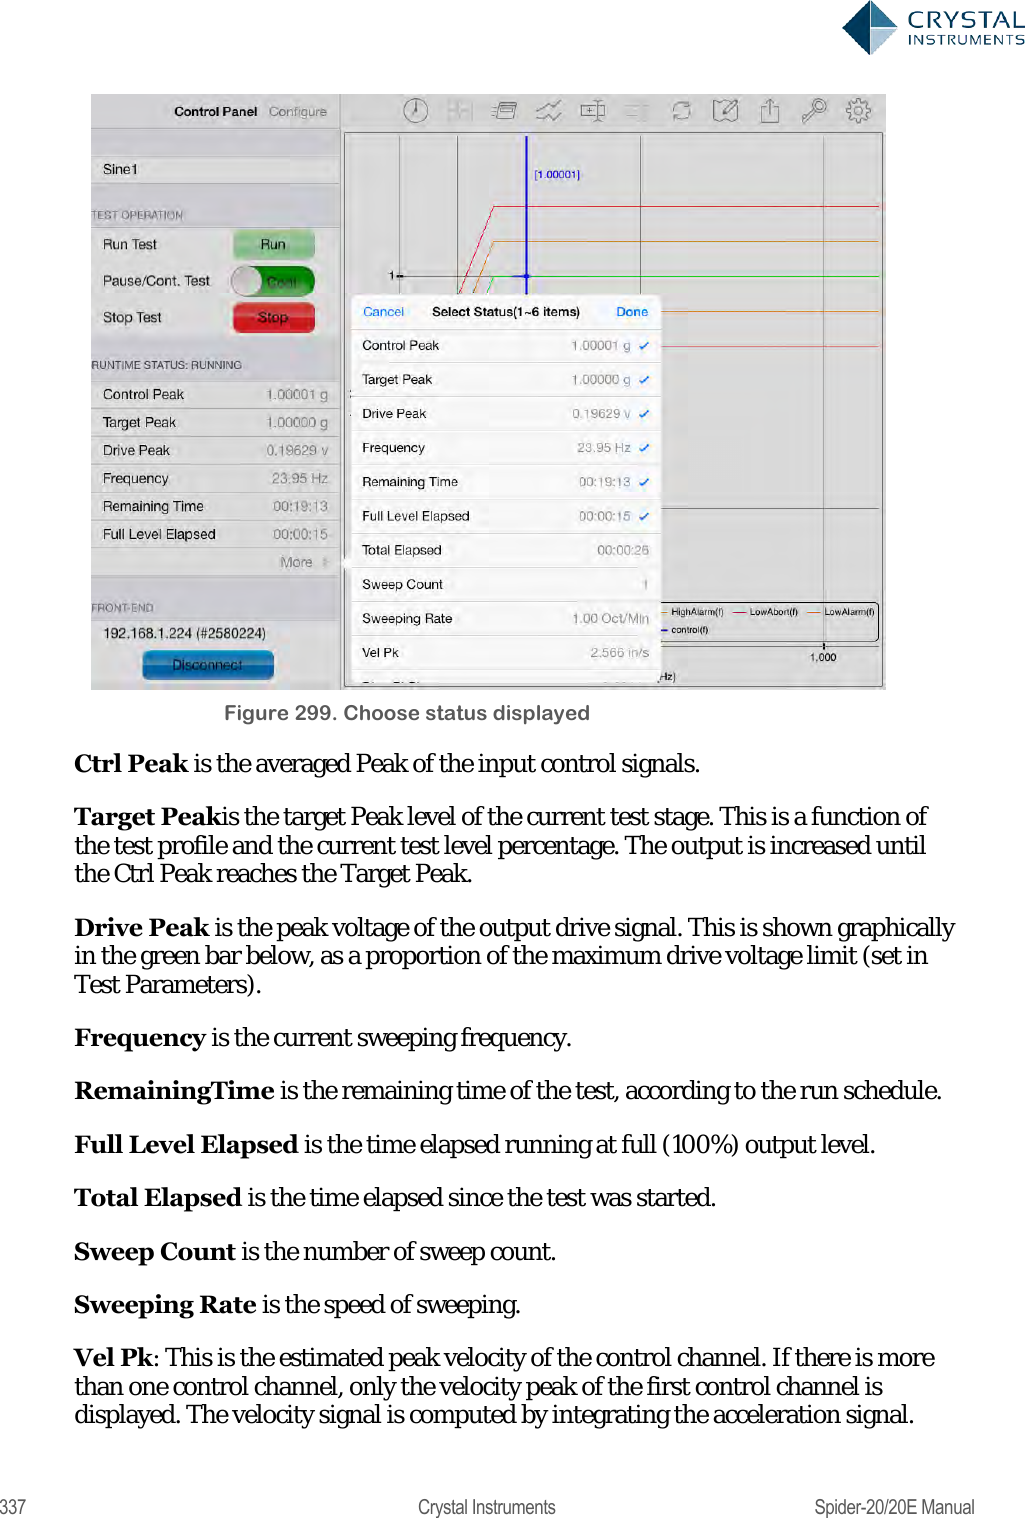  337  Crystal Instruments  Spider-20/20E Manual  Figure 299. Choose status displayed Ctrl Peak is the averaged Peak of the input control signals. Target Peakis the target Peak level of the current test stage. This is a function of the test profile and the current test level percentage. The output is increased until the Ctrl Peak reaches the Target Peak. Drive Peak is the peak voltage of the output drive signal. This is shown graphically in the green bar below, as a proportion of the maximum drive voltage limit (set in Test Parameters). Frequency is the current sweeping frequency. RemainingTime is the remaining time of the test, according to the run schedule. Full Level Elapsed is the time elapsed running at full (100%) output level. Total Elapsed is the time elapsed since the test was started. Sweep Count is the number of sweep count. Sweeping Rate is the speed of sweeping. Vel Pk: This is the estimated peak velocity of the control channel. If there is more than one control channel, only the velocity peak of the first control channel is displayed. The velocity signal is computed by integrating the acceleration signal. 